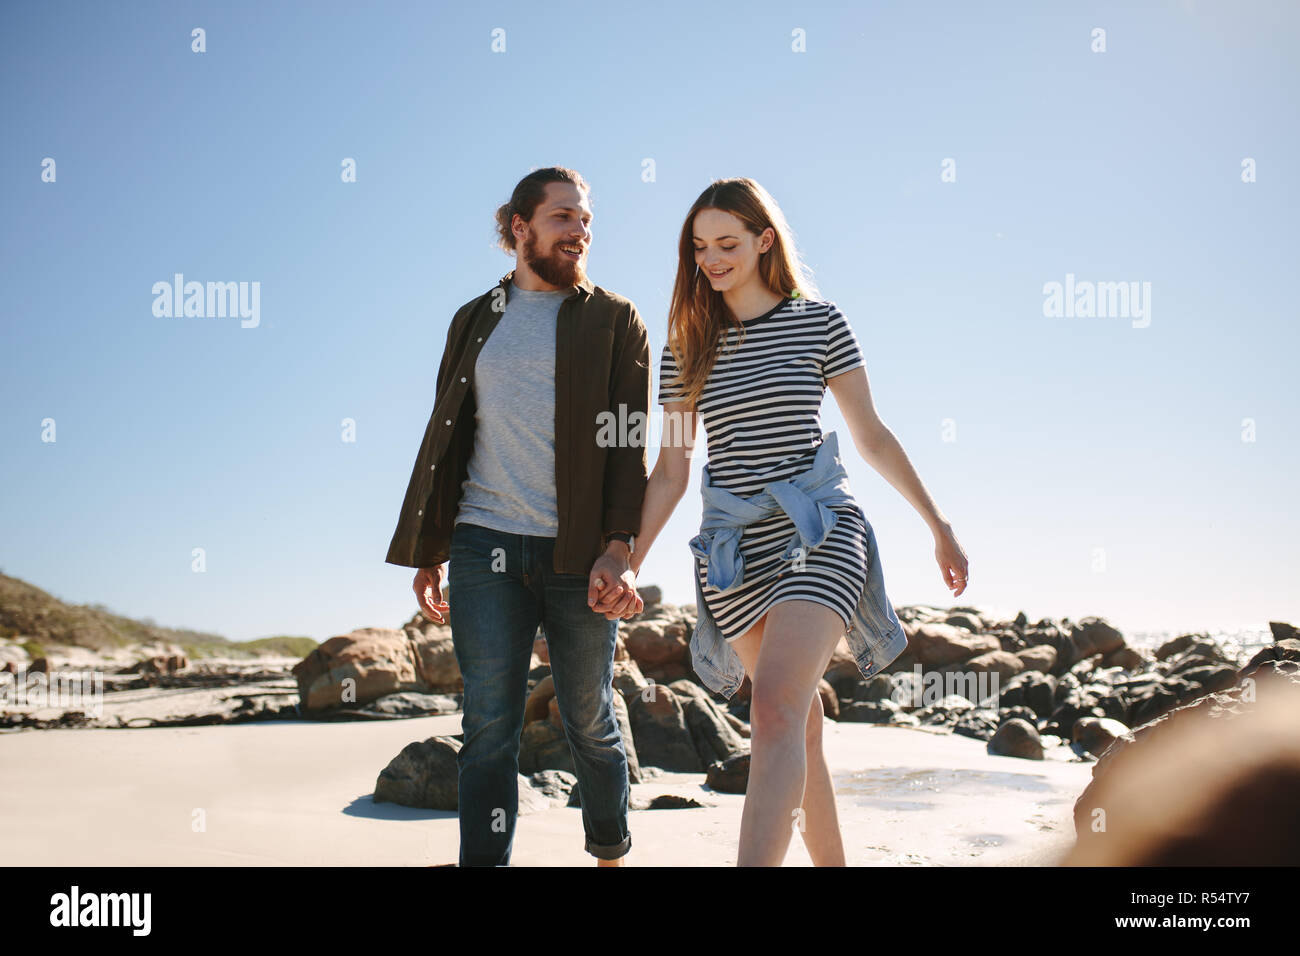 Beautiful couple strolling along a rocky beach. Man and woman walking with hand in hand on the shore. Stock Photo